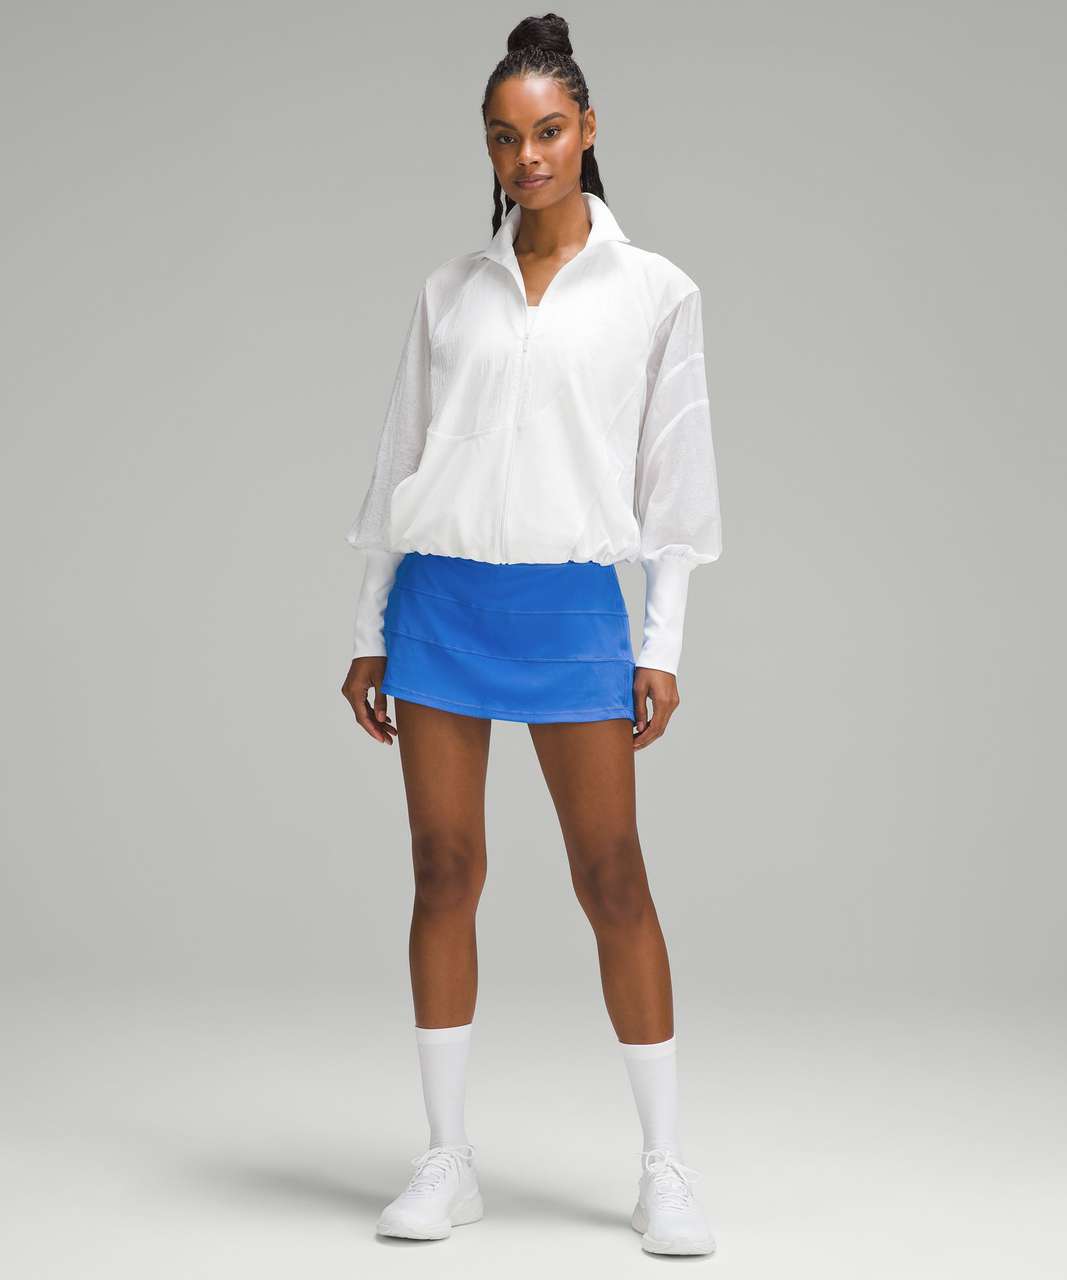 Block Party High Times Pants + Pace Rival Skirts + Heathered Naval